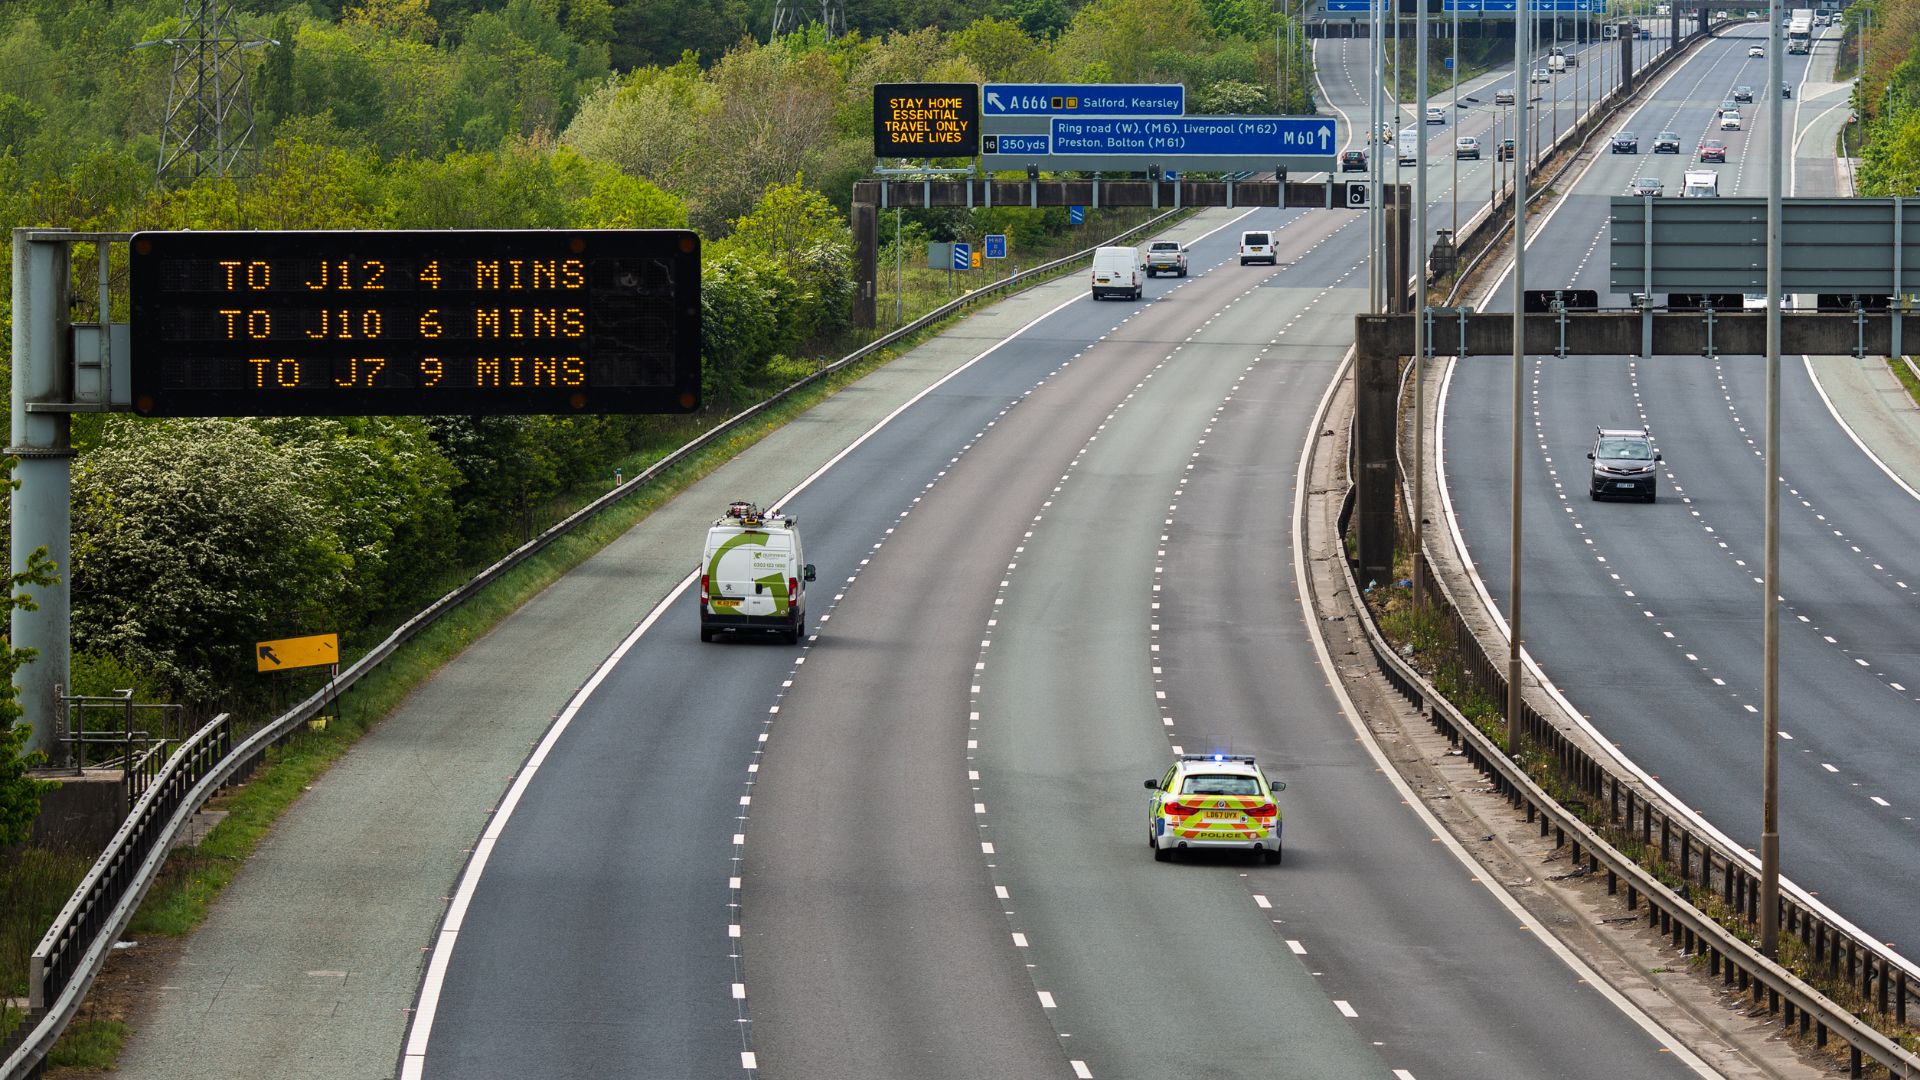 A police car on the M60 Motorway